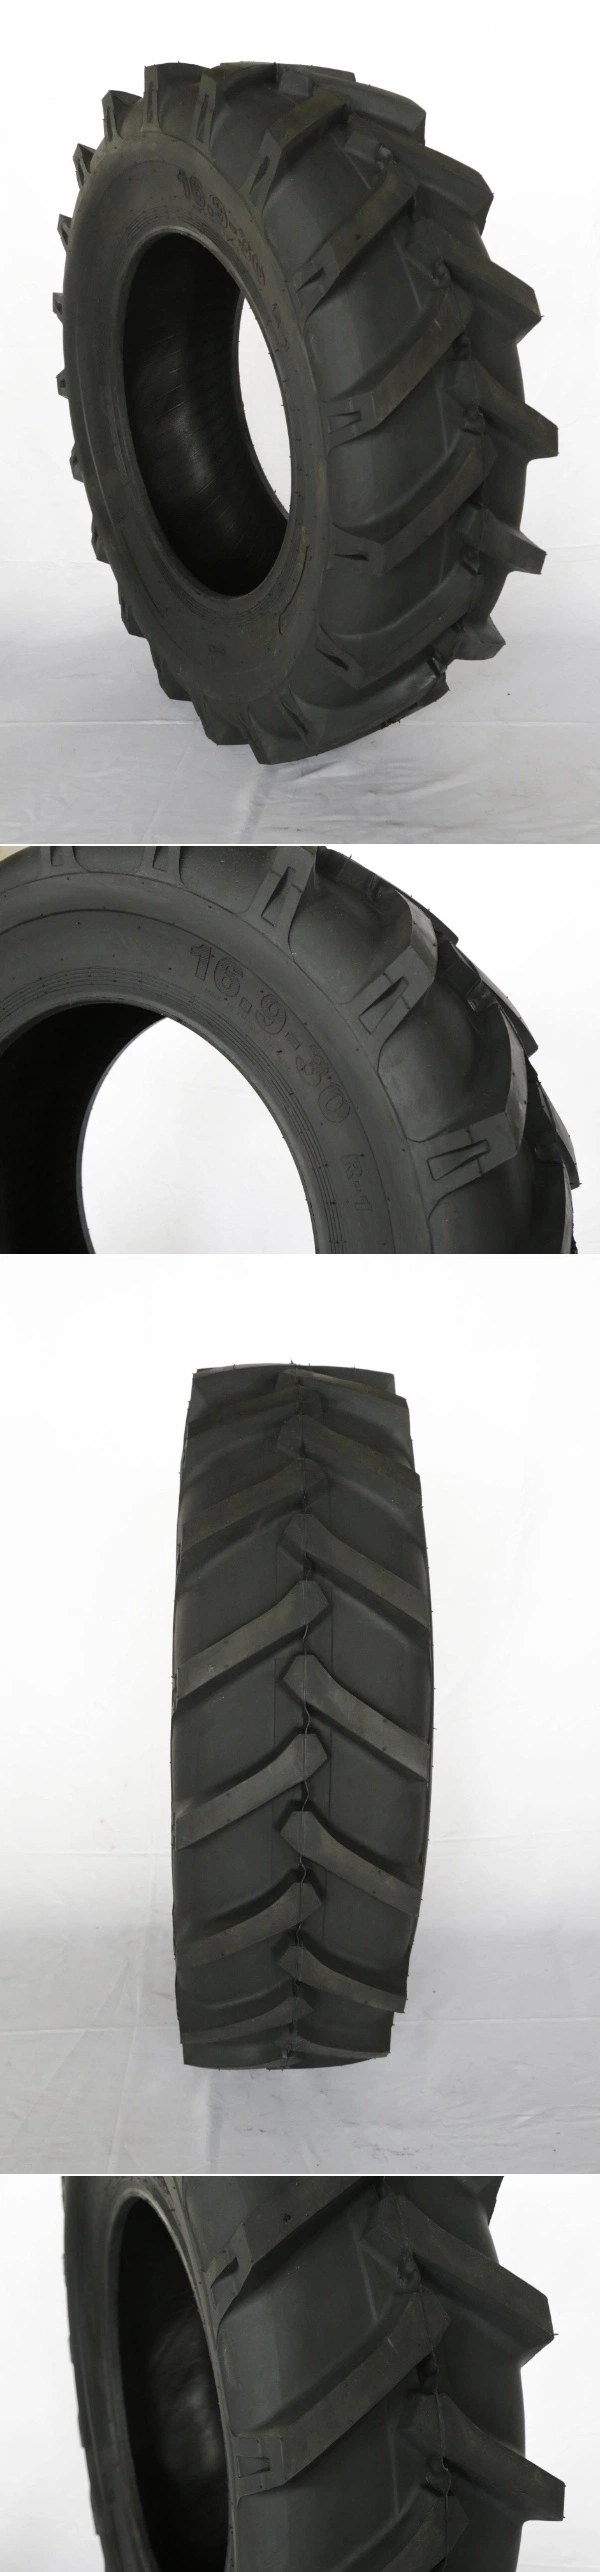 16.9-30 20.8-38 Rubber Manufacture R1 Bias Agricultural Tractor Tyre